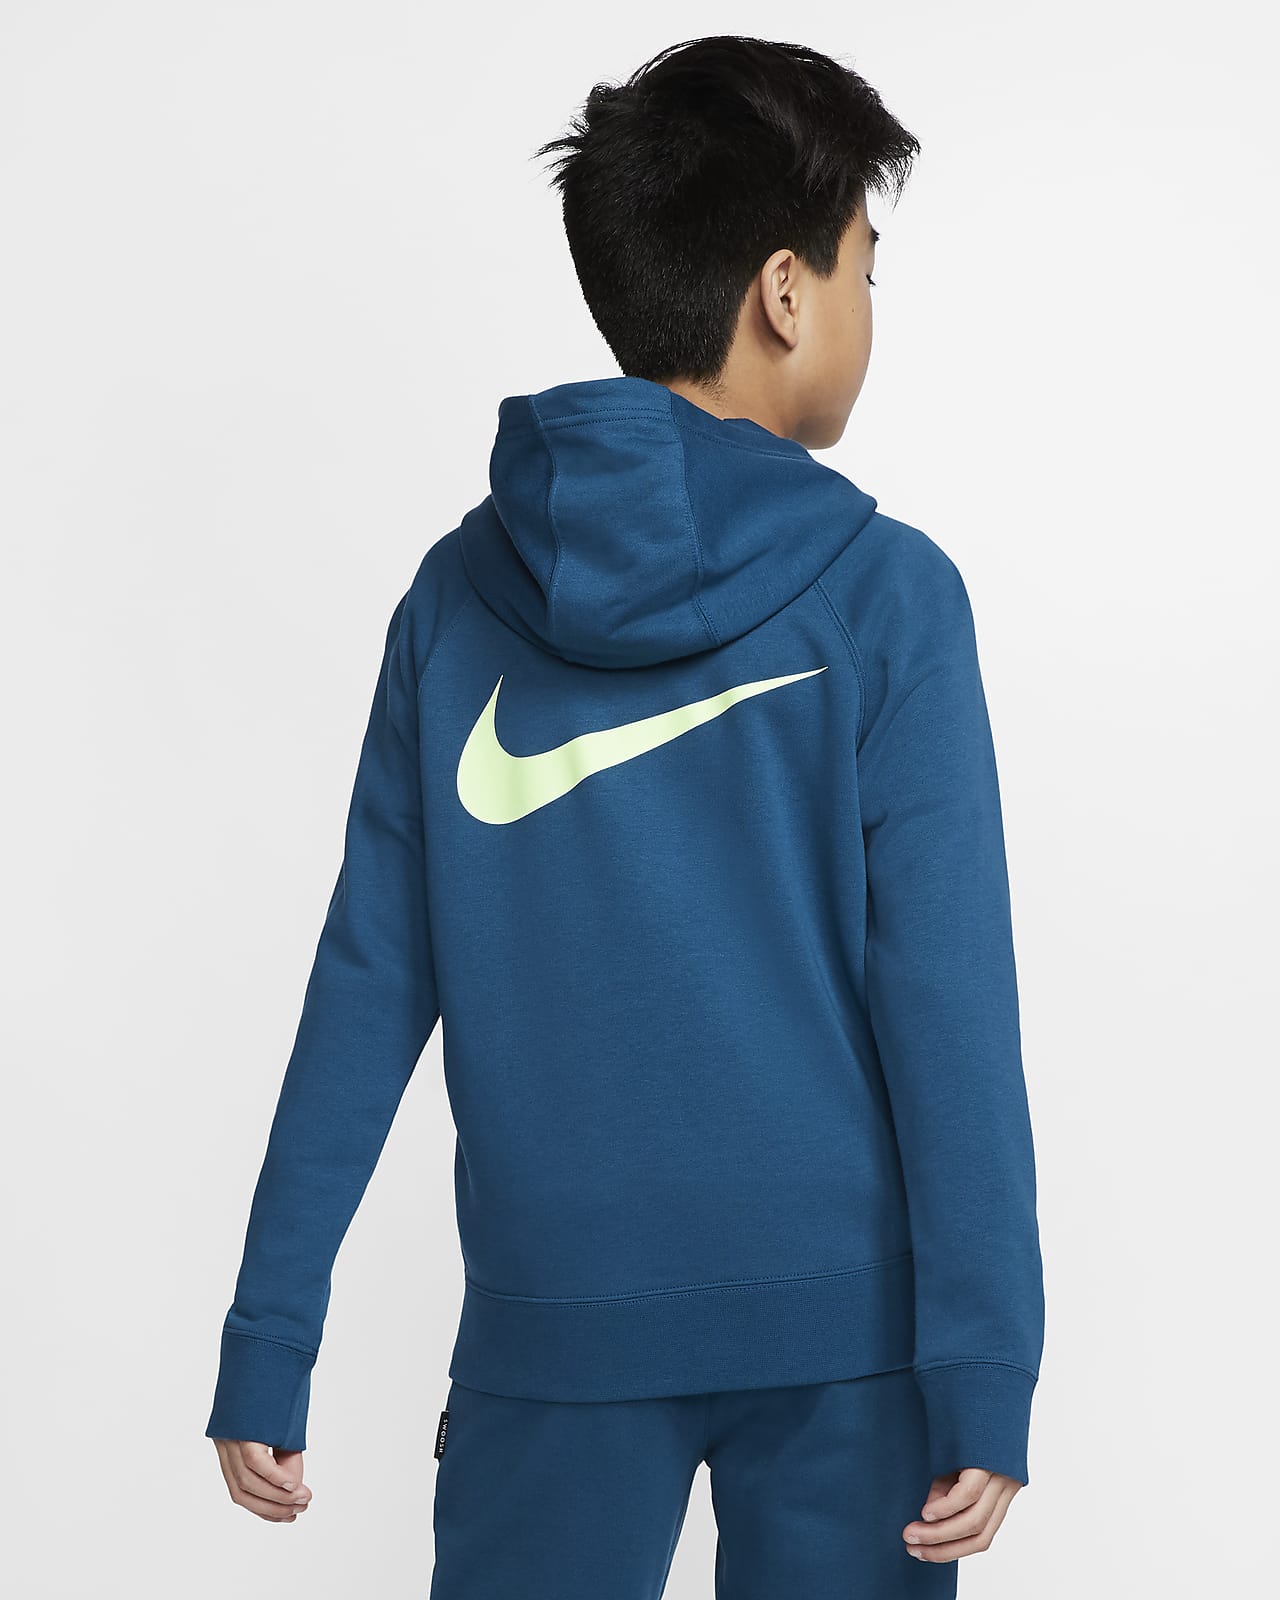 french terry nike hoodie